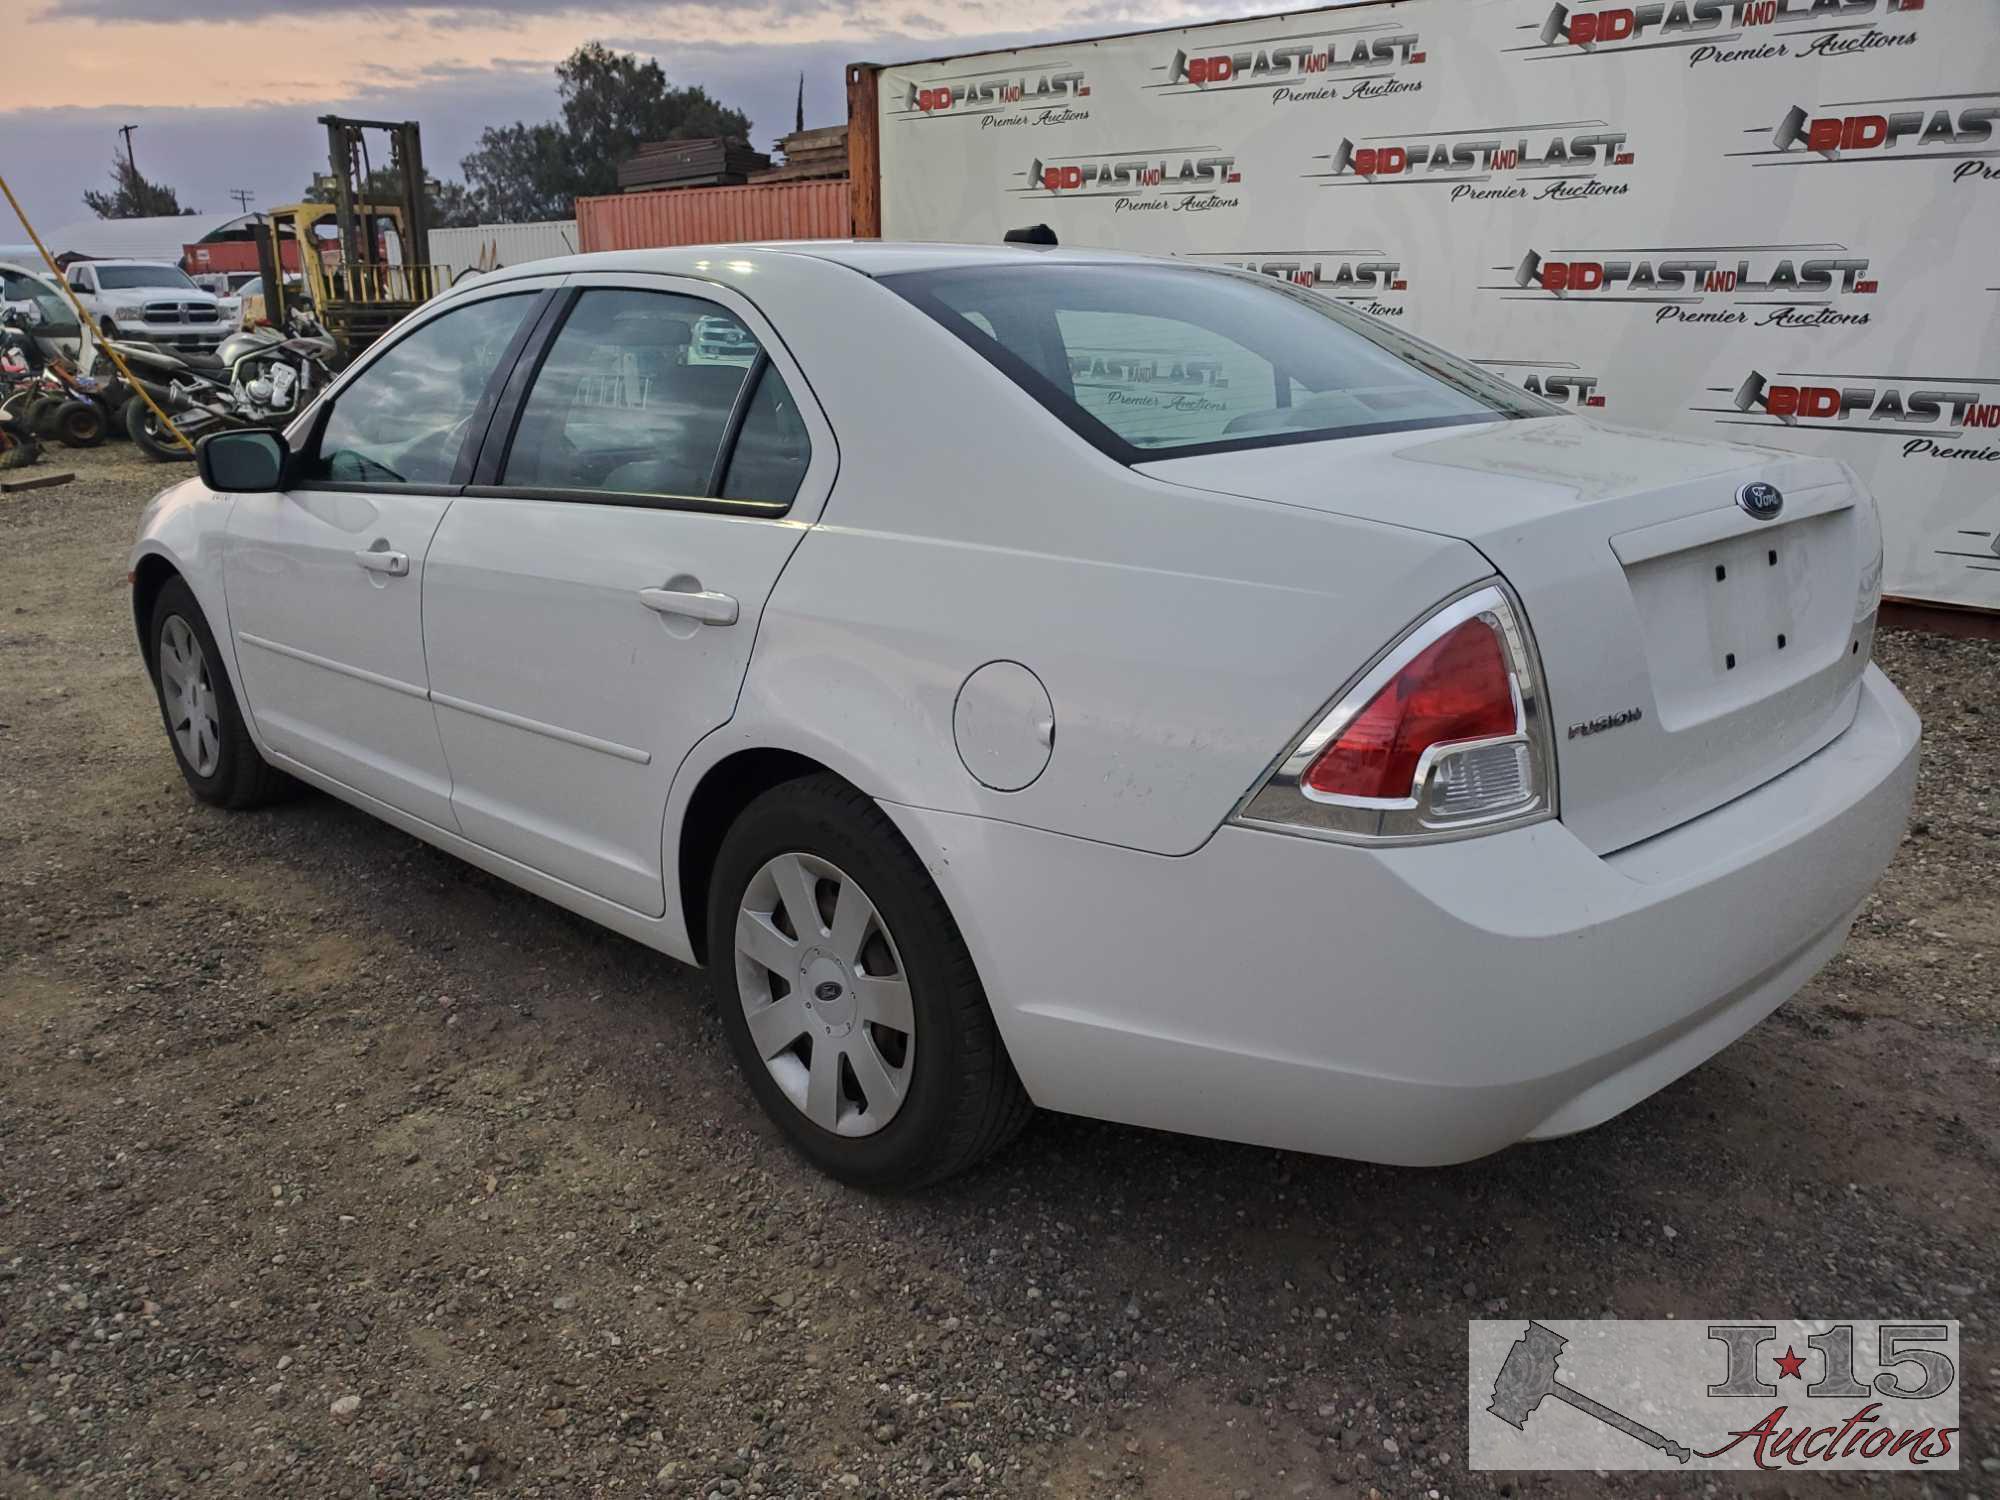 2008 Ford Fusion Only 46899 Miles CURRENT SMOG